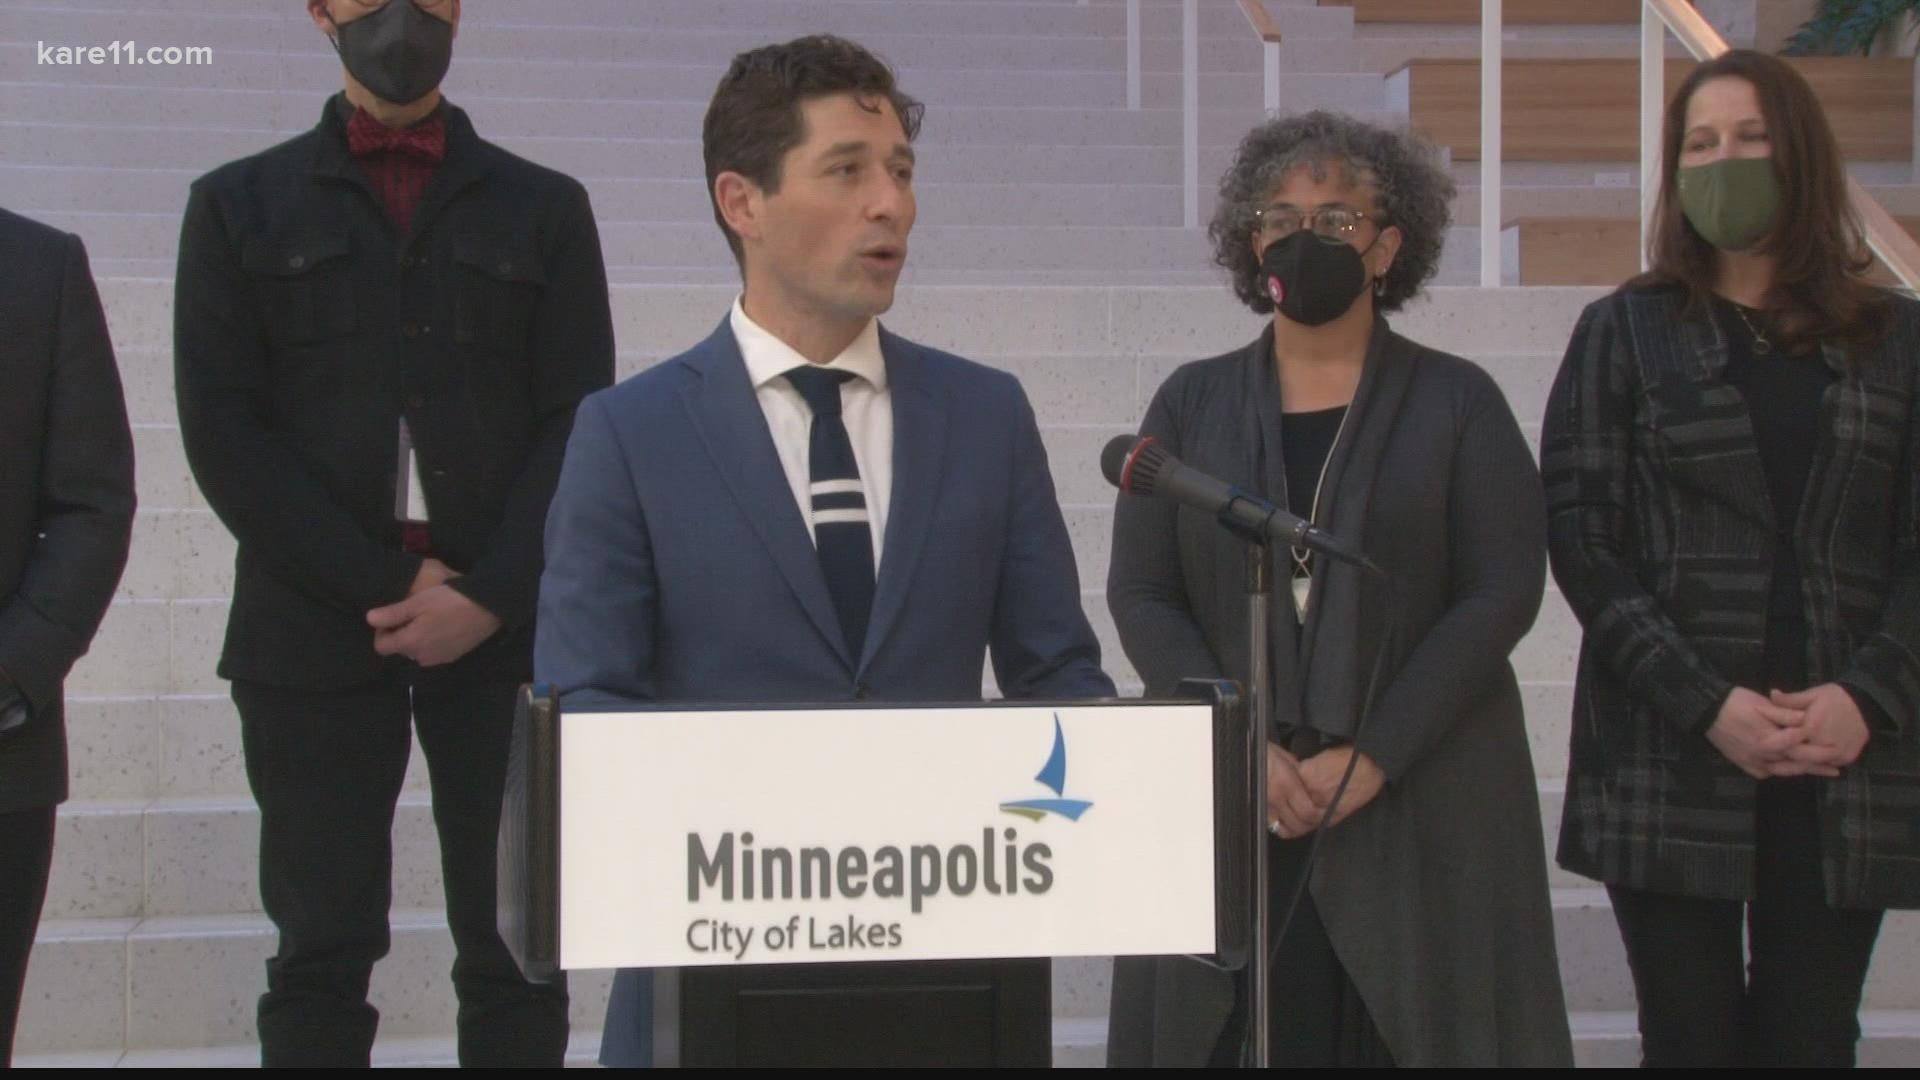 Friday marked the start of a new governing structure in Minneapolis, giving the mayor more oversight of major city departments.